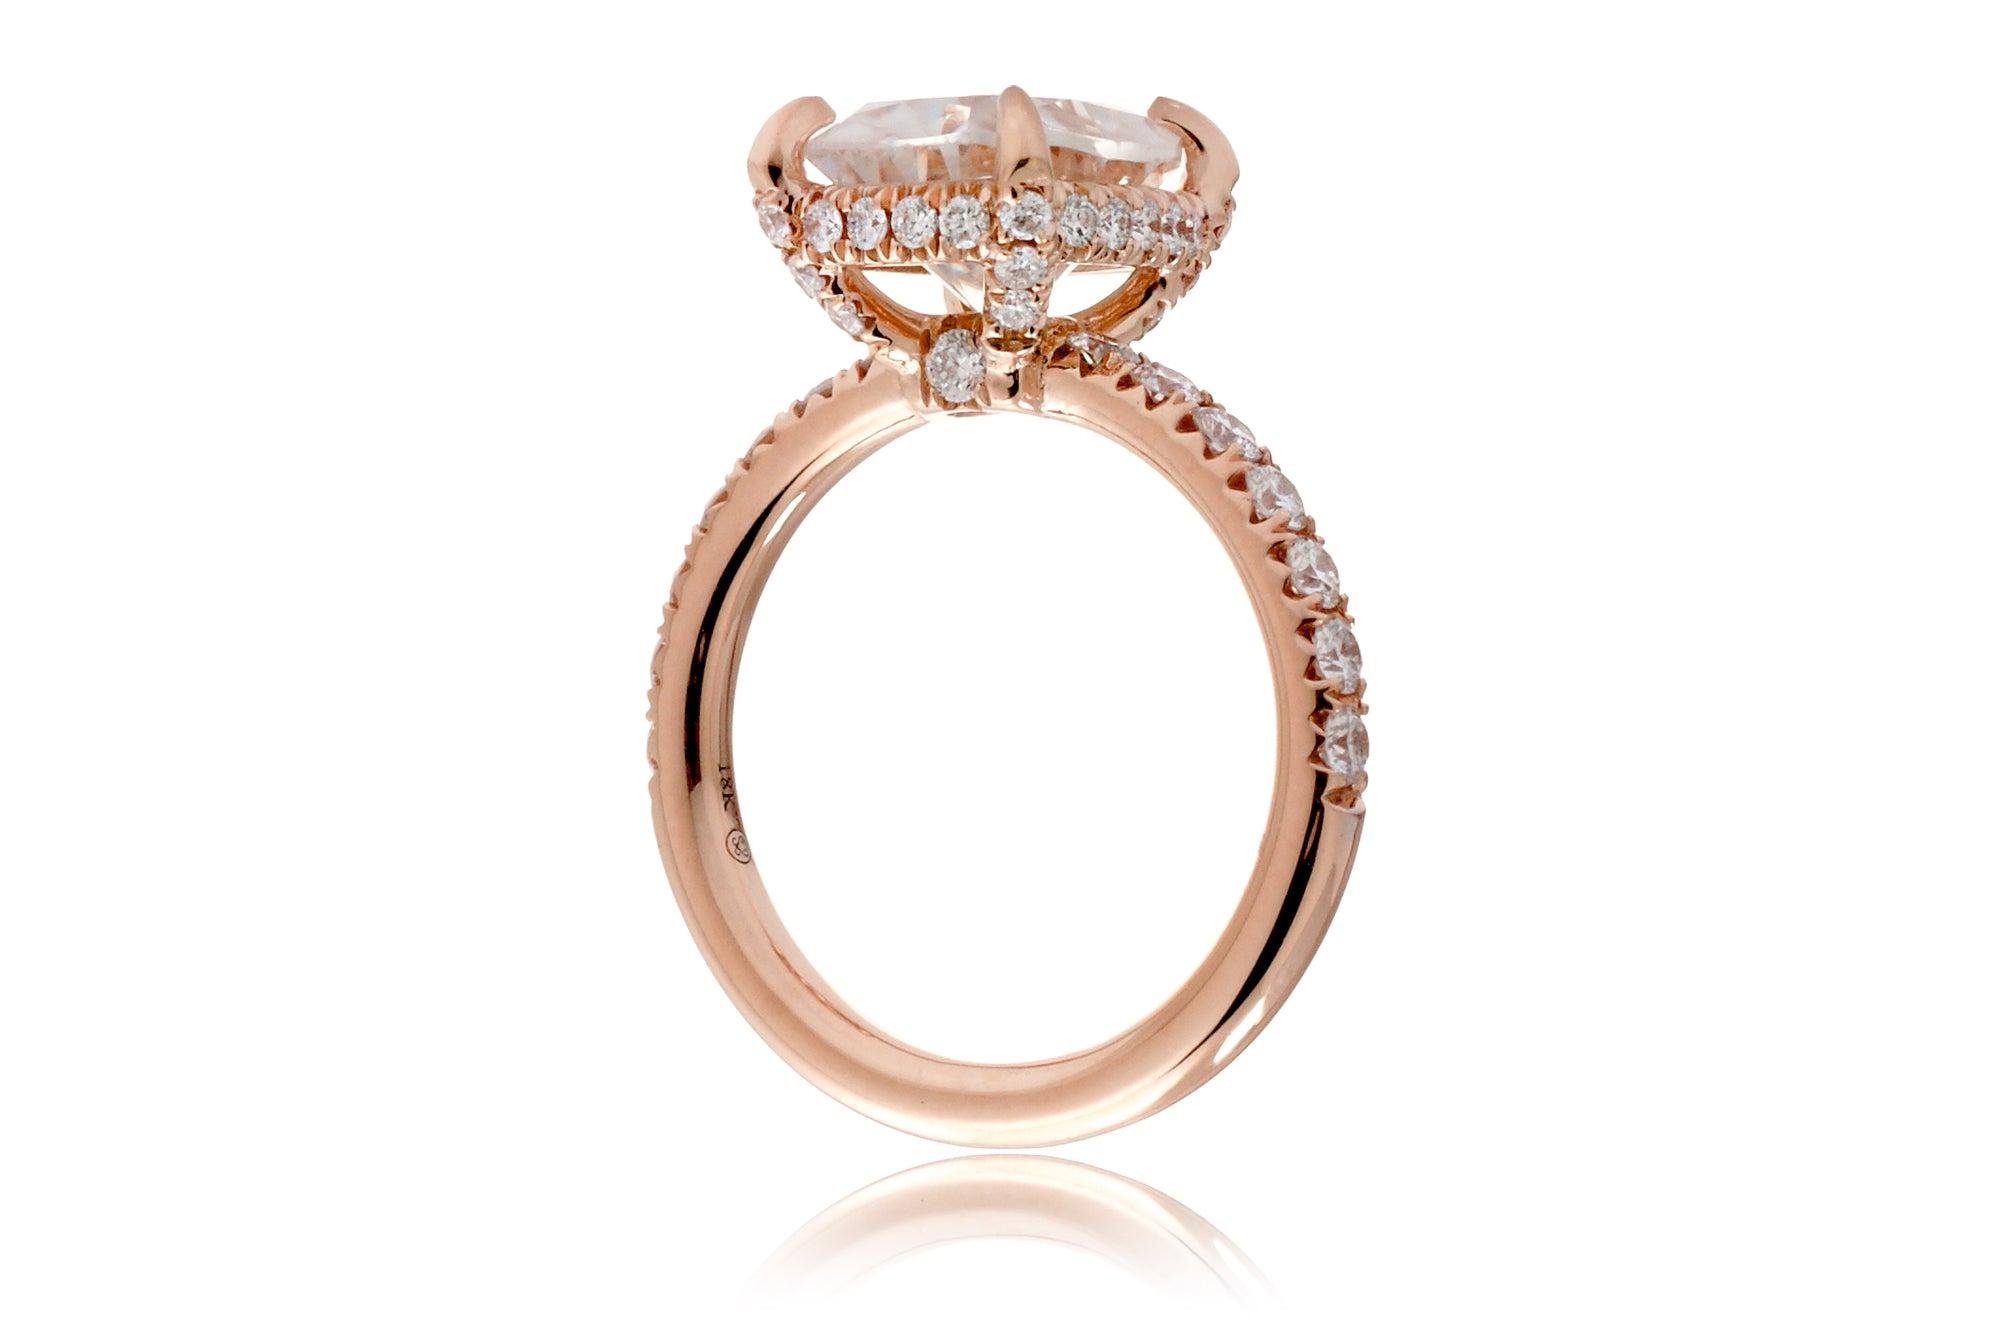 The Drenched Solitaire Cushion Moissanite